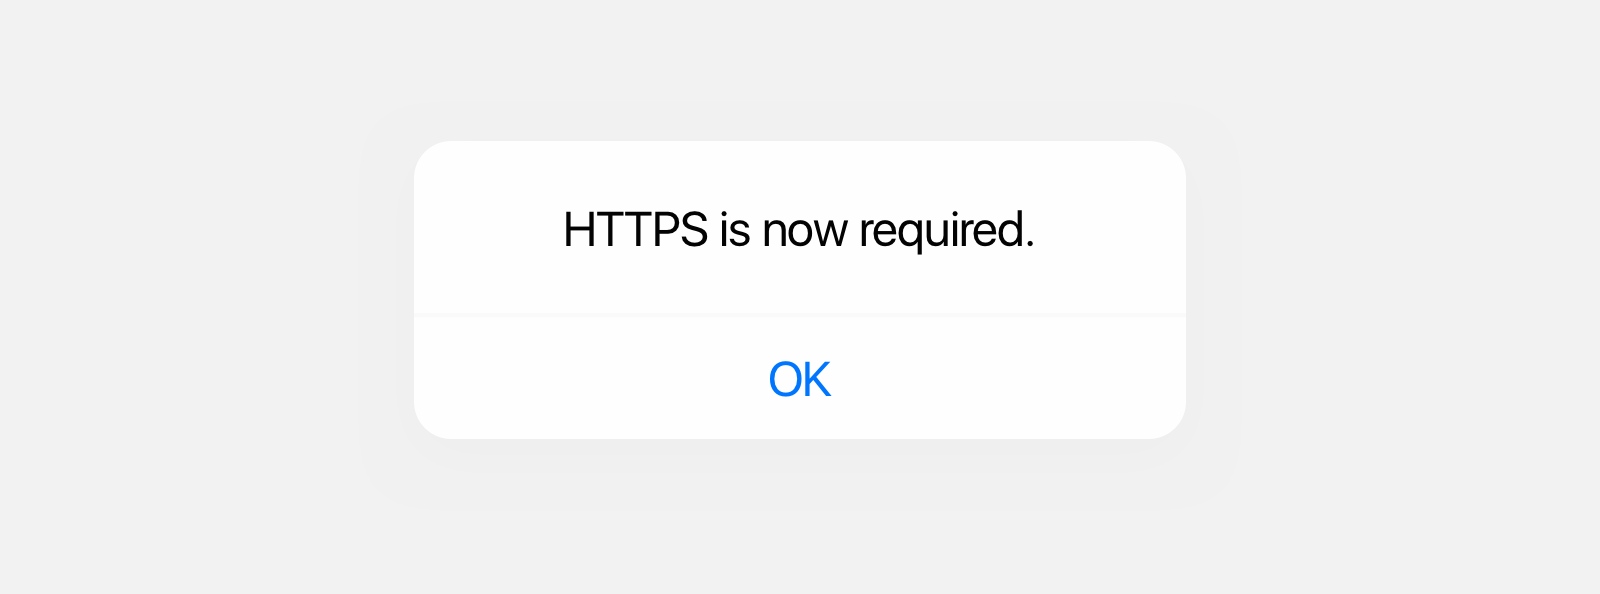 HTTPS is now required